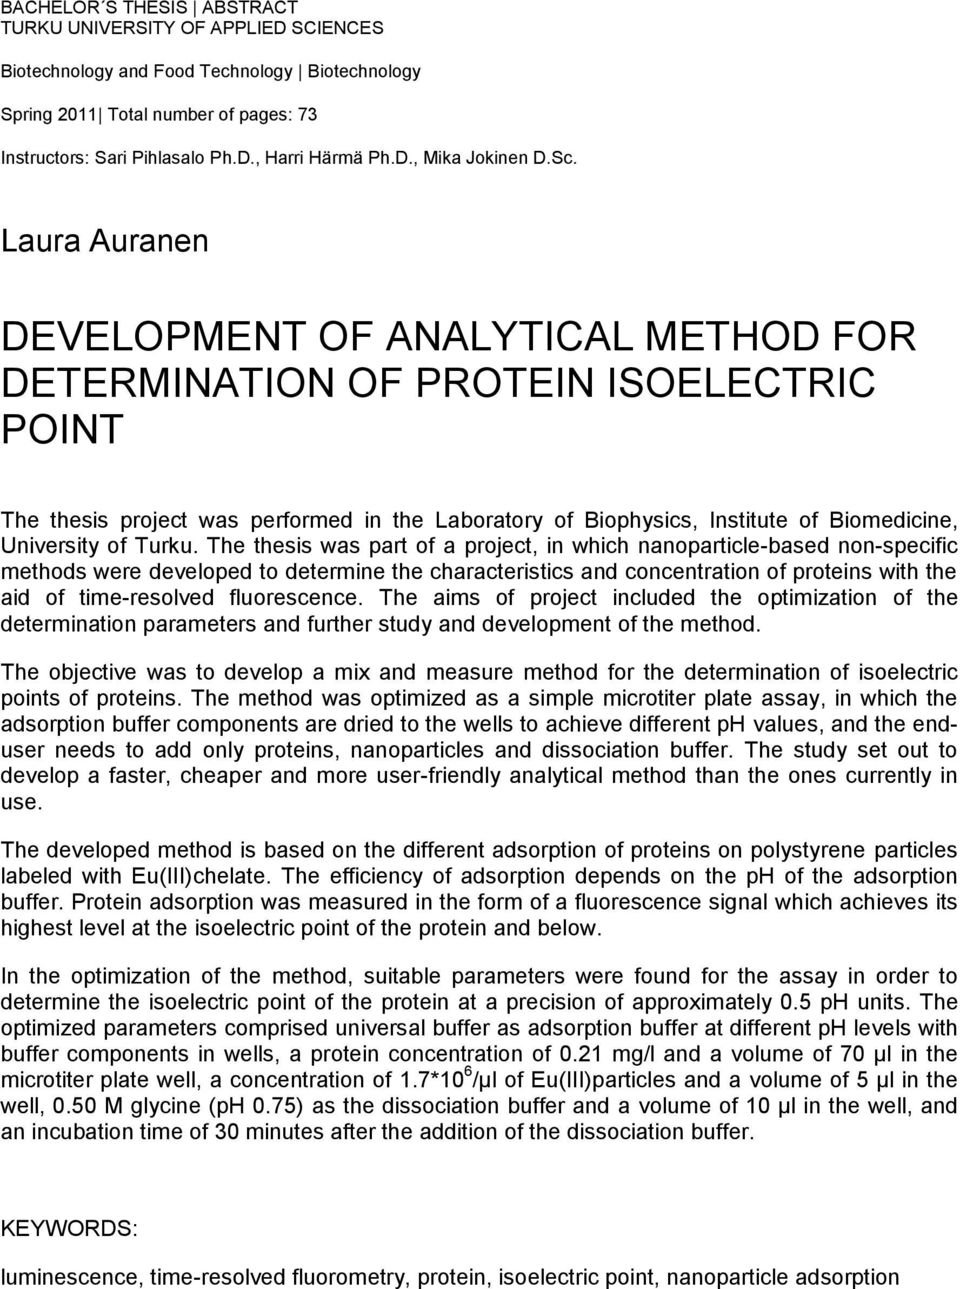 Laura Auranen DEVELOPMENT OF ANALYTICAL METHOD FOR DETERMINATION OF PROTEIN ISOELECTRIC POINT The thesis project was performed in the Laboratory of Biophysics, Institute of Biomedicine, University of